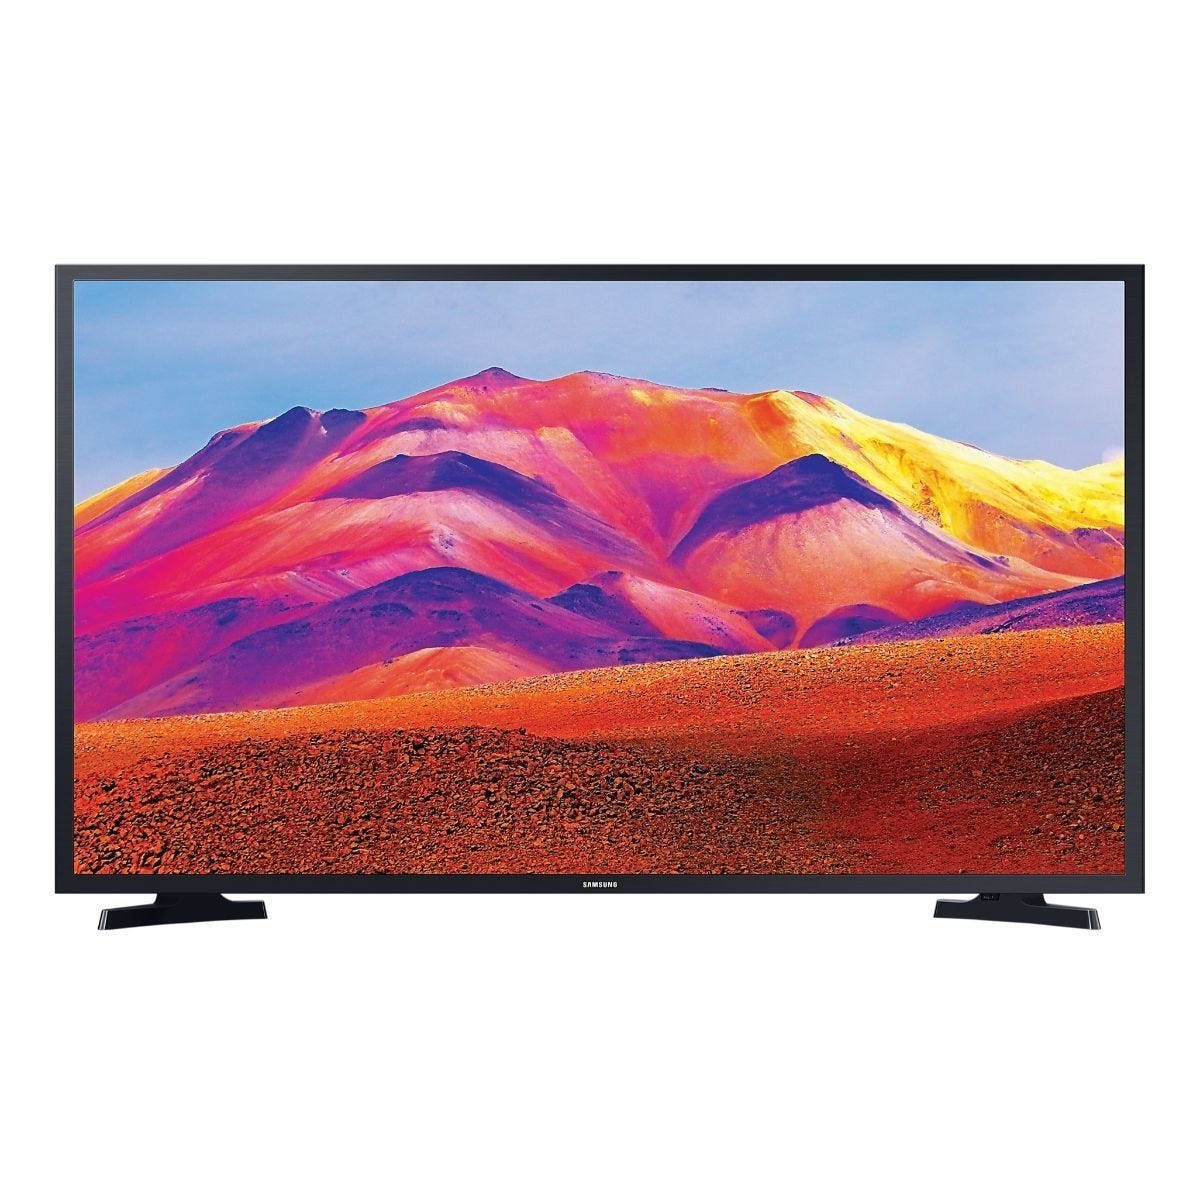 Samsung 40 Inch FHD Smart LED TV with Built In Receiver - UA40T5300